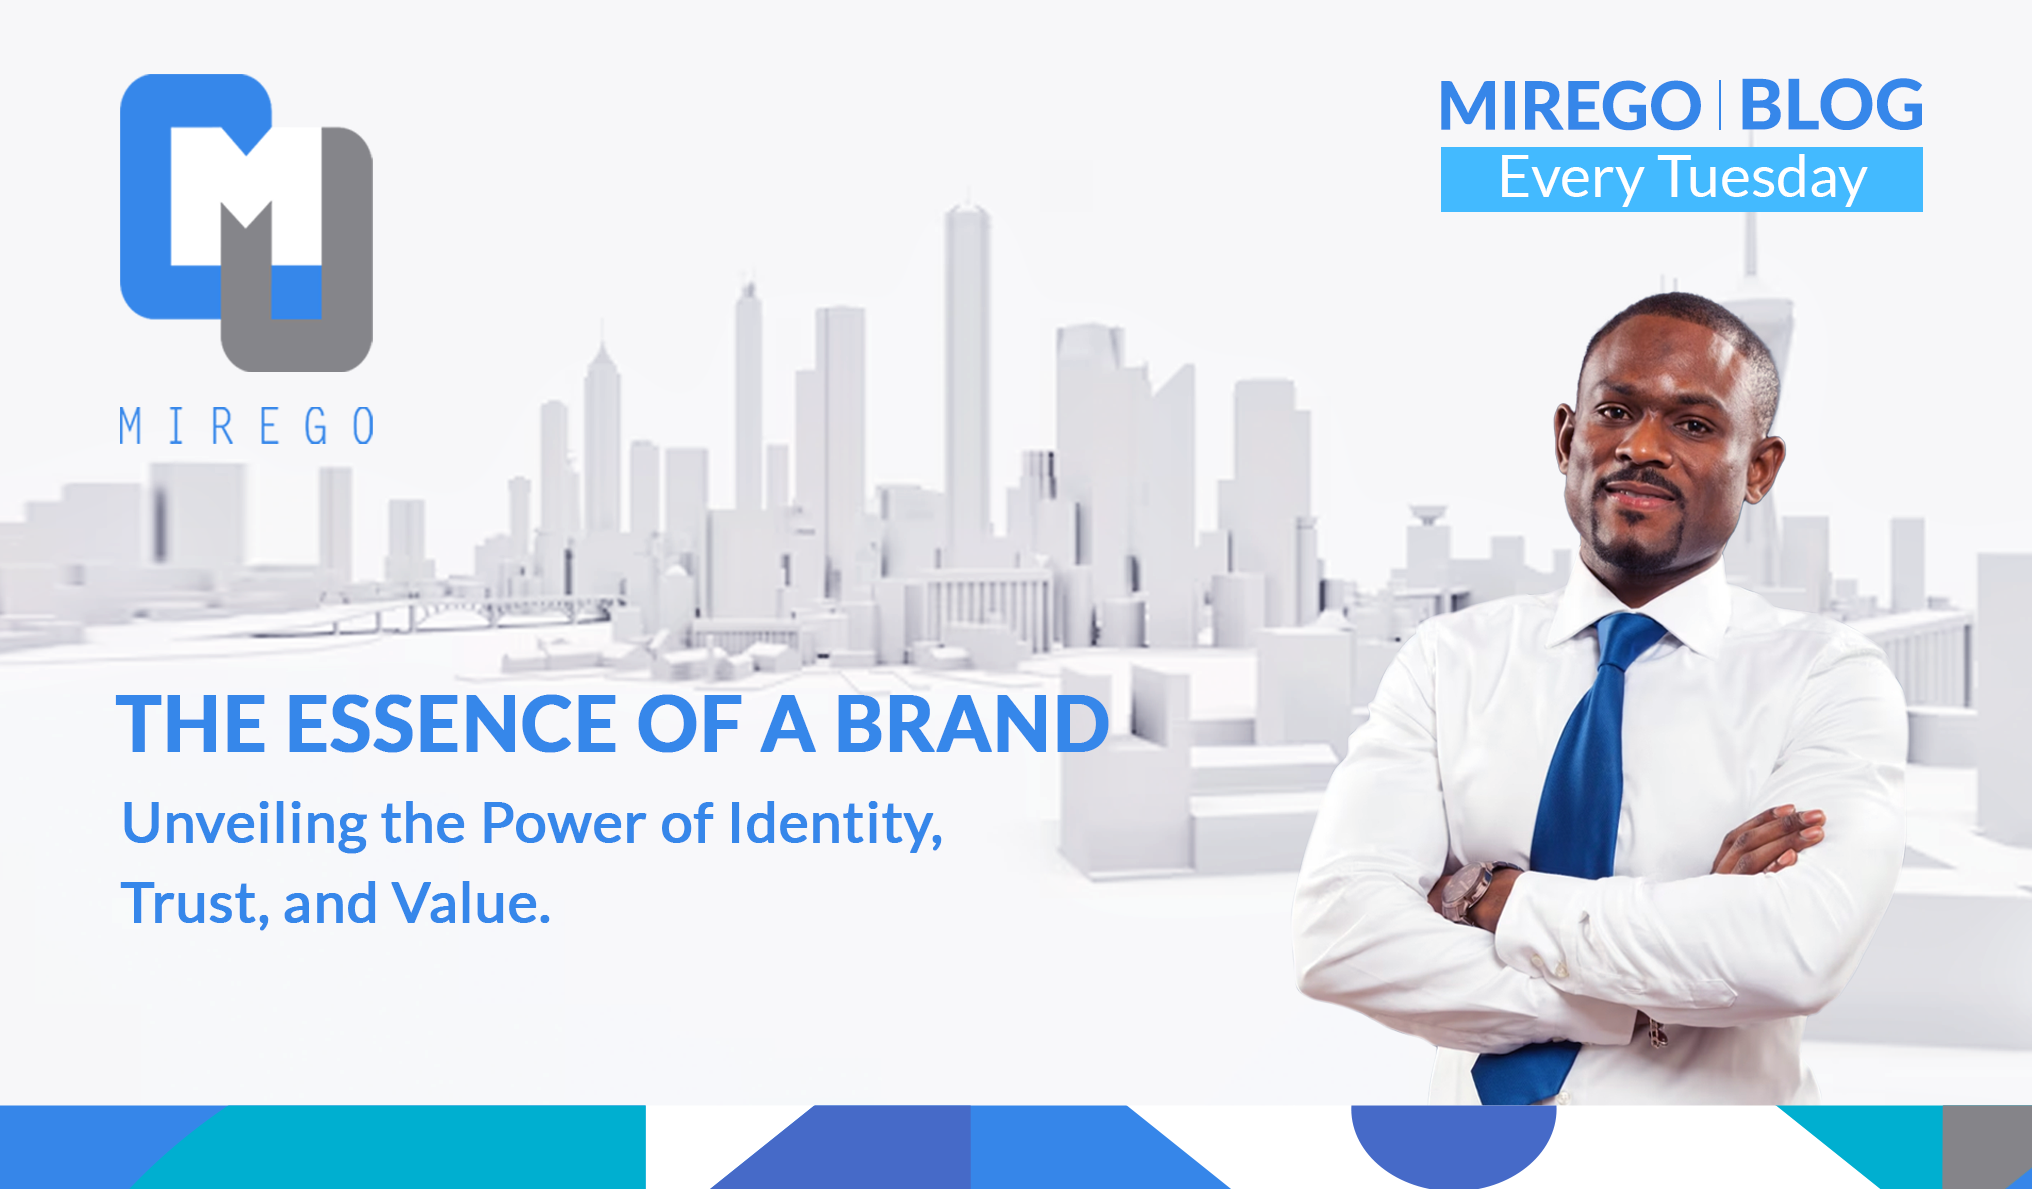 The Essence of Brand: Unveiling the Power of Identity, Trust, and Value